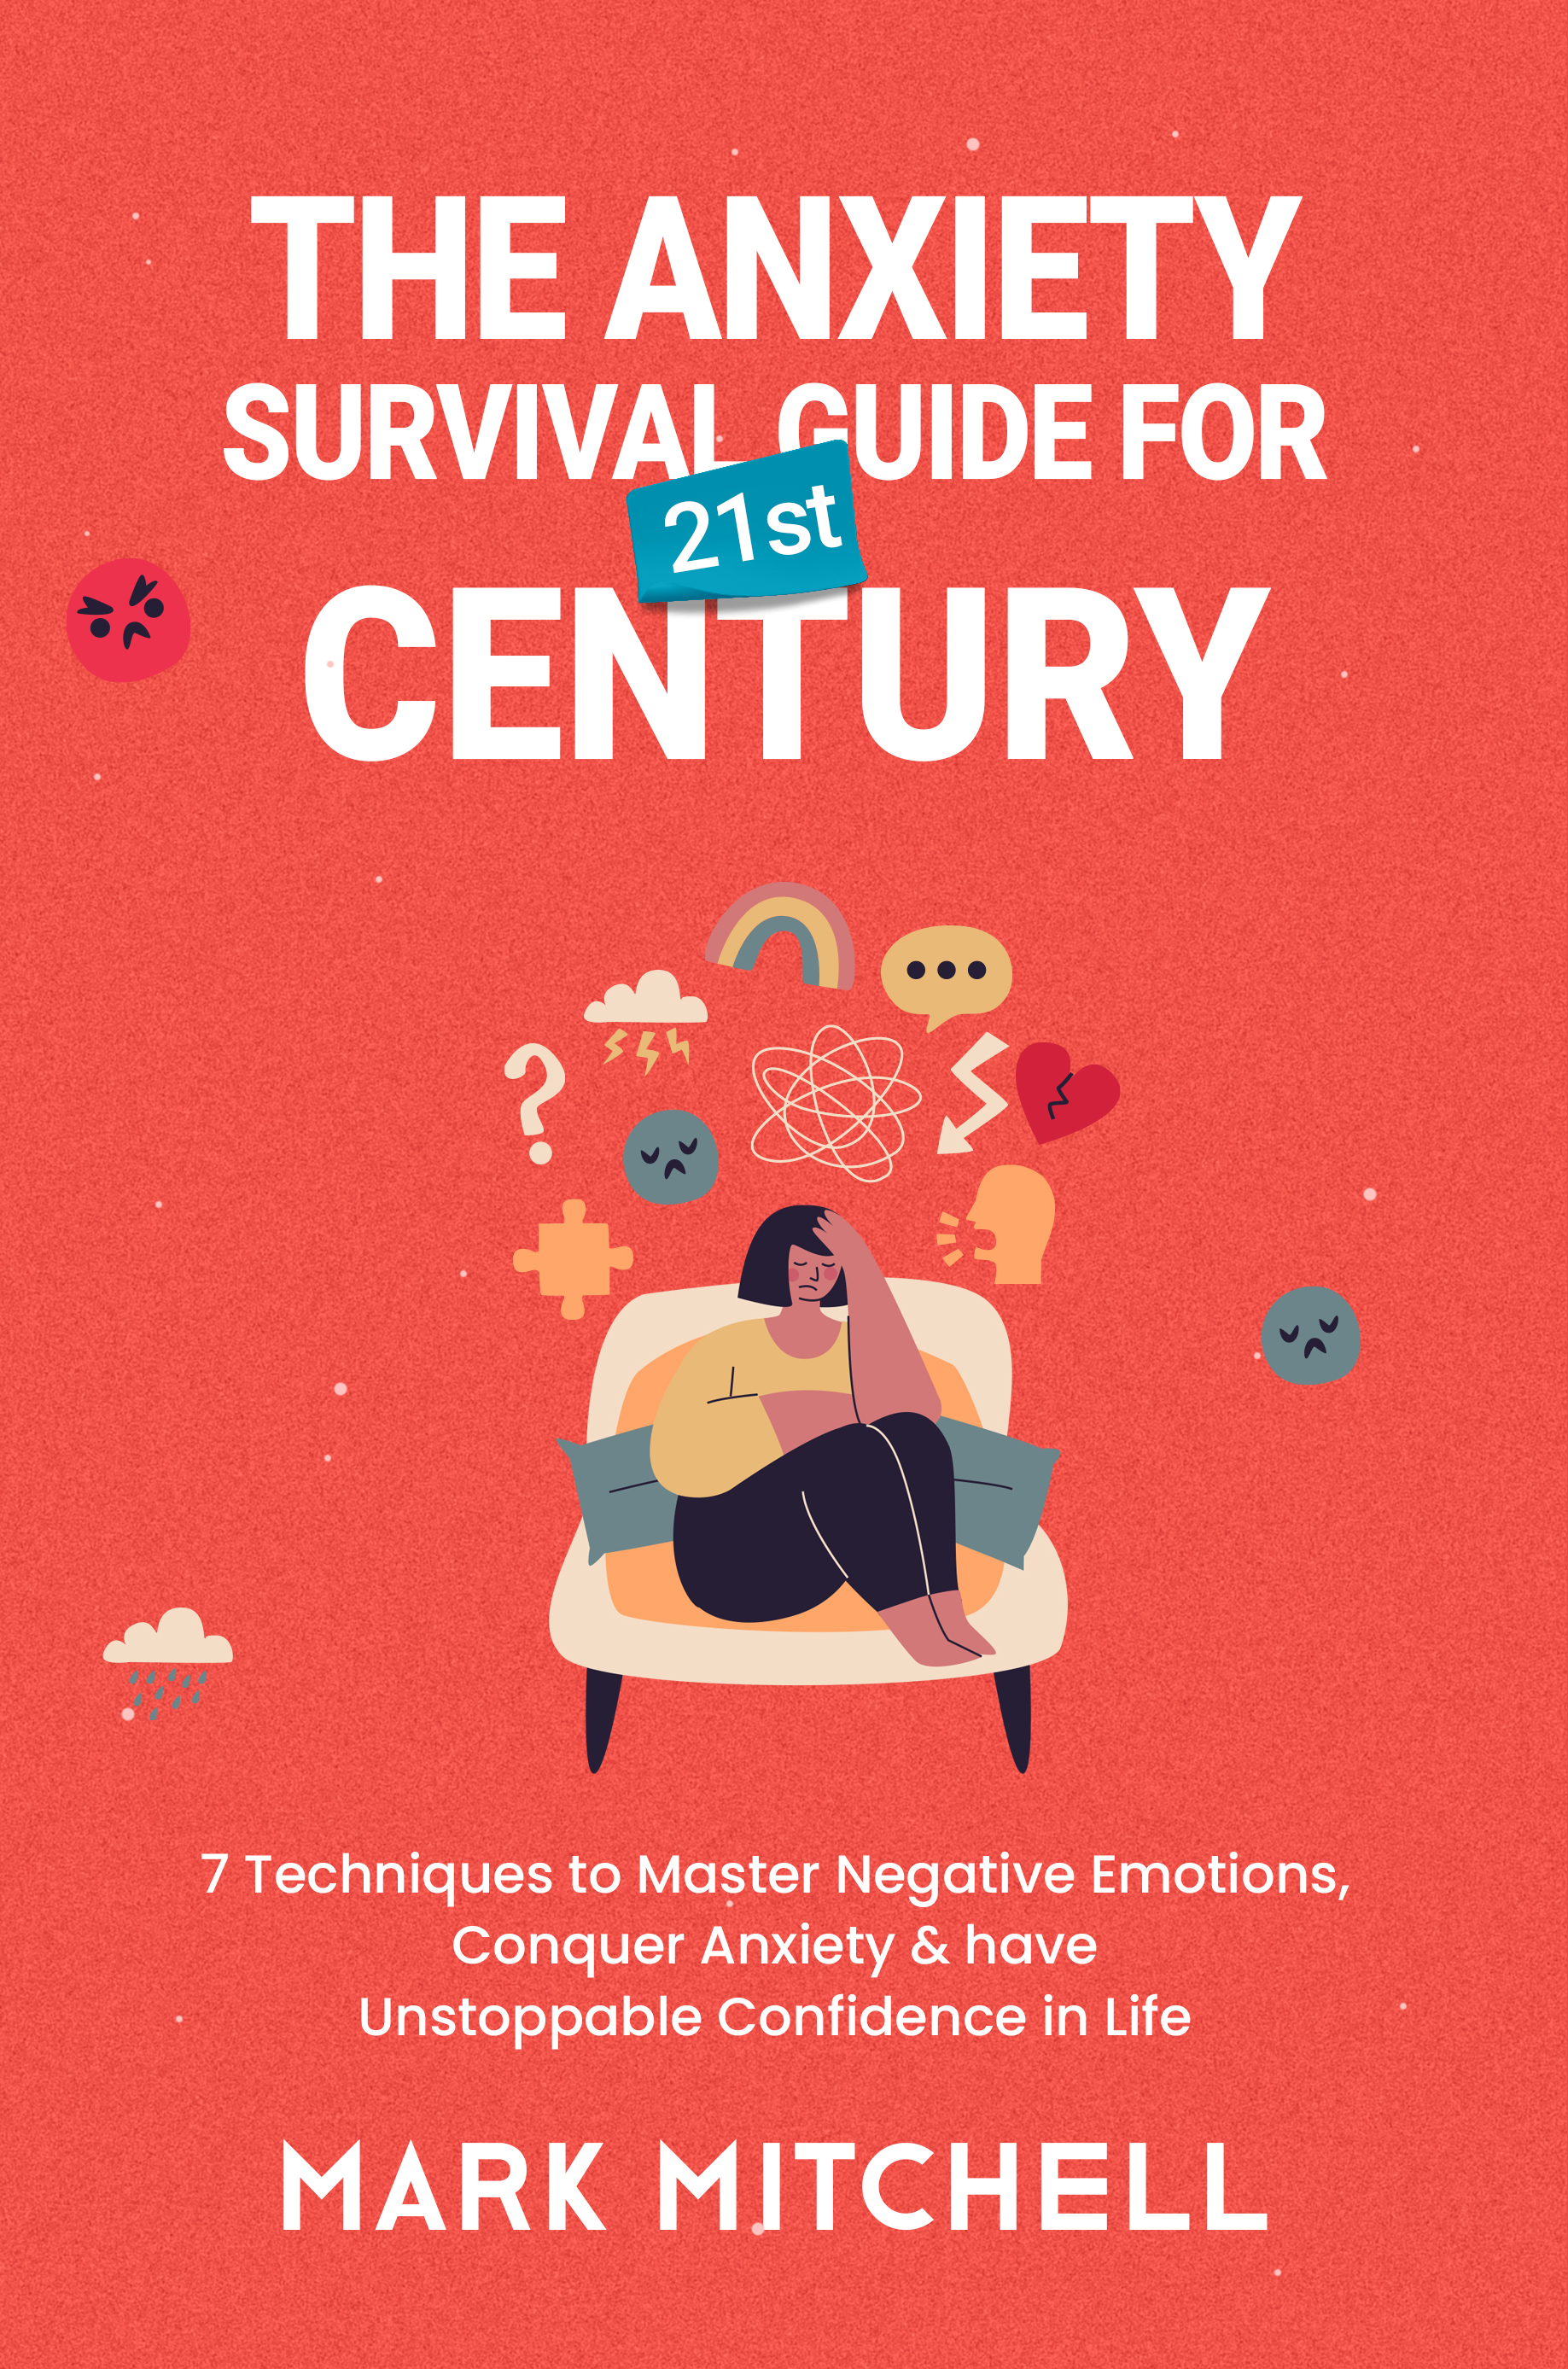 The Anxiety Survival Guide for 21st Century